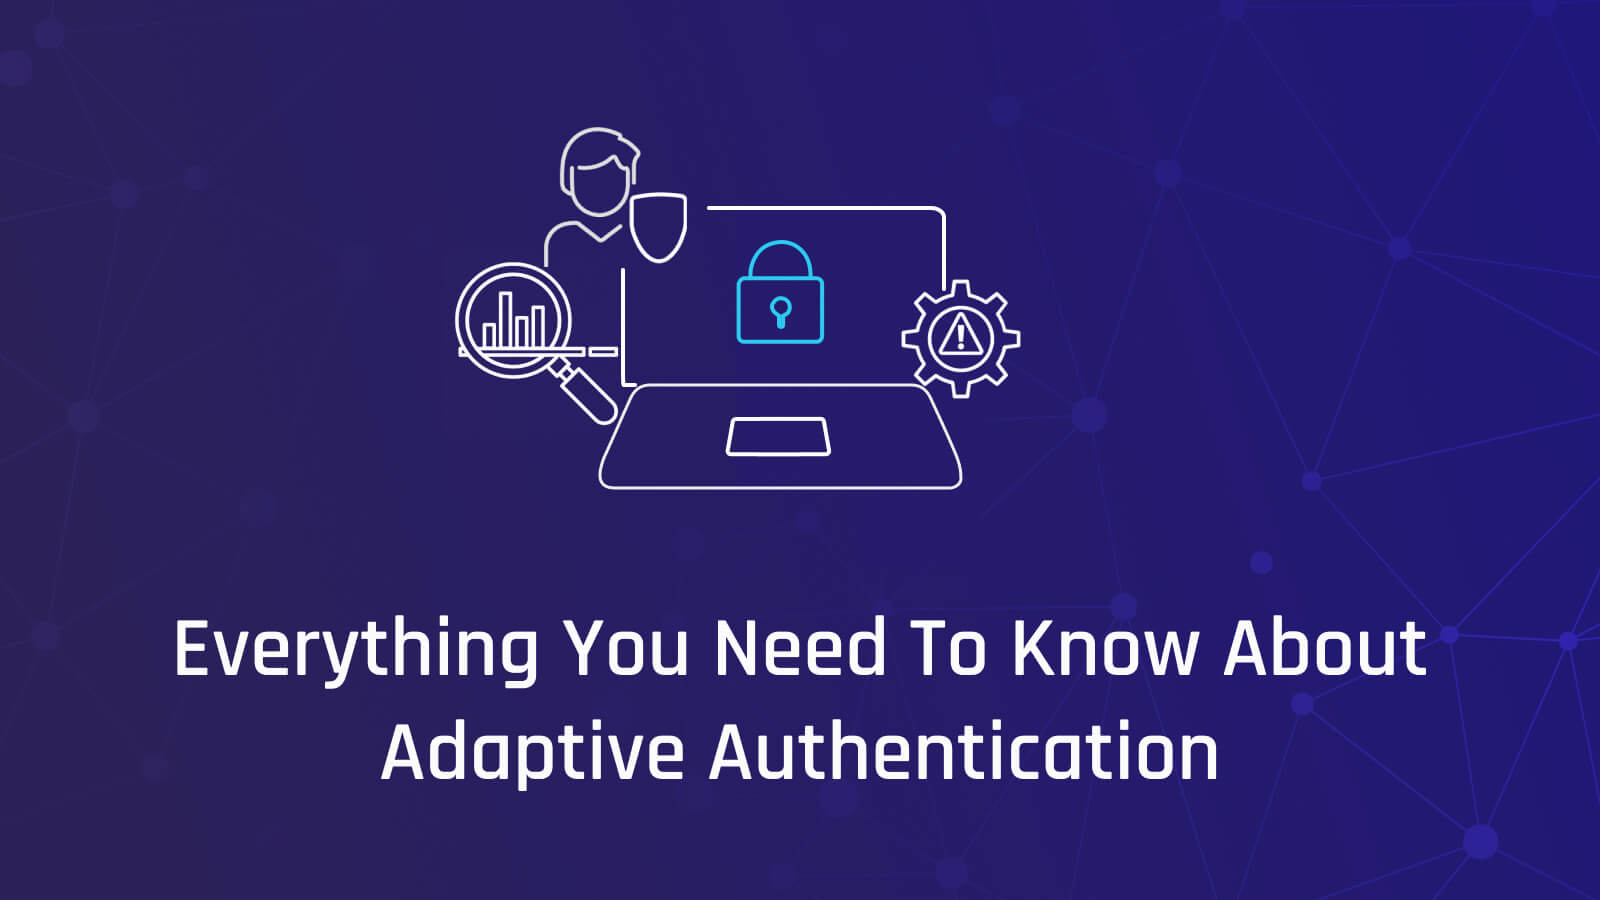 What Is Adaptive Authentication?